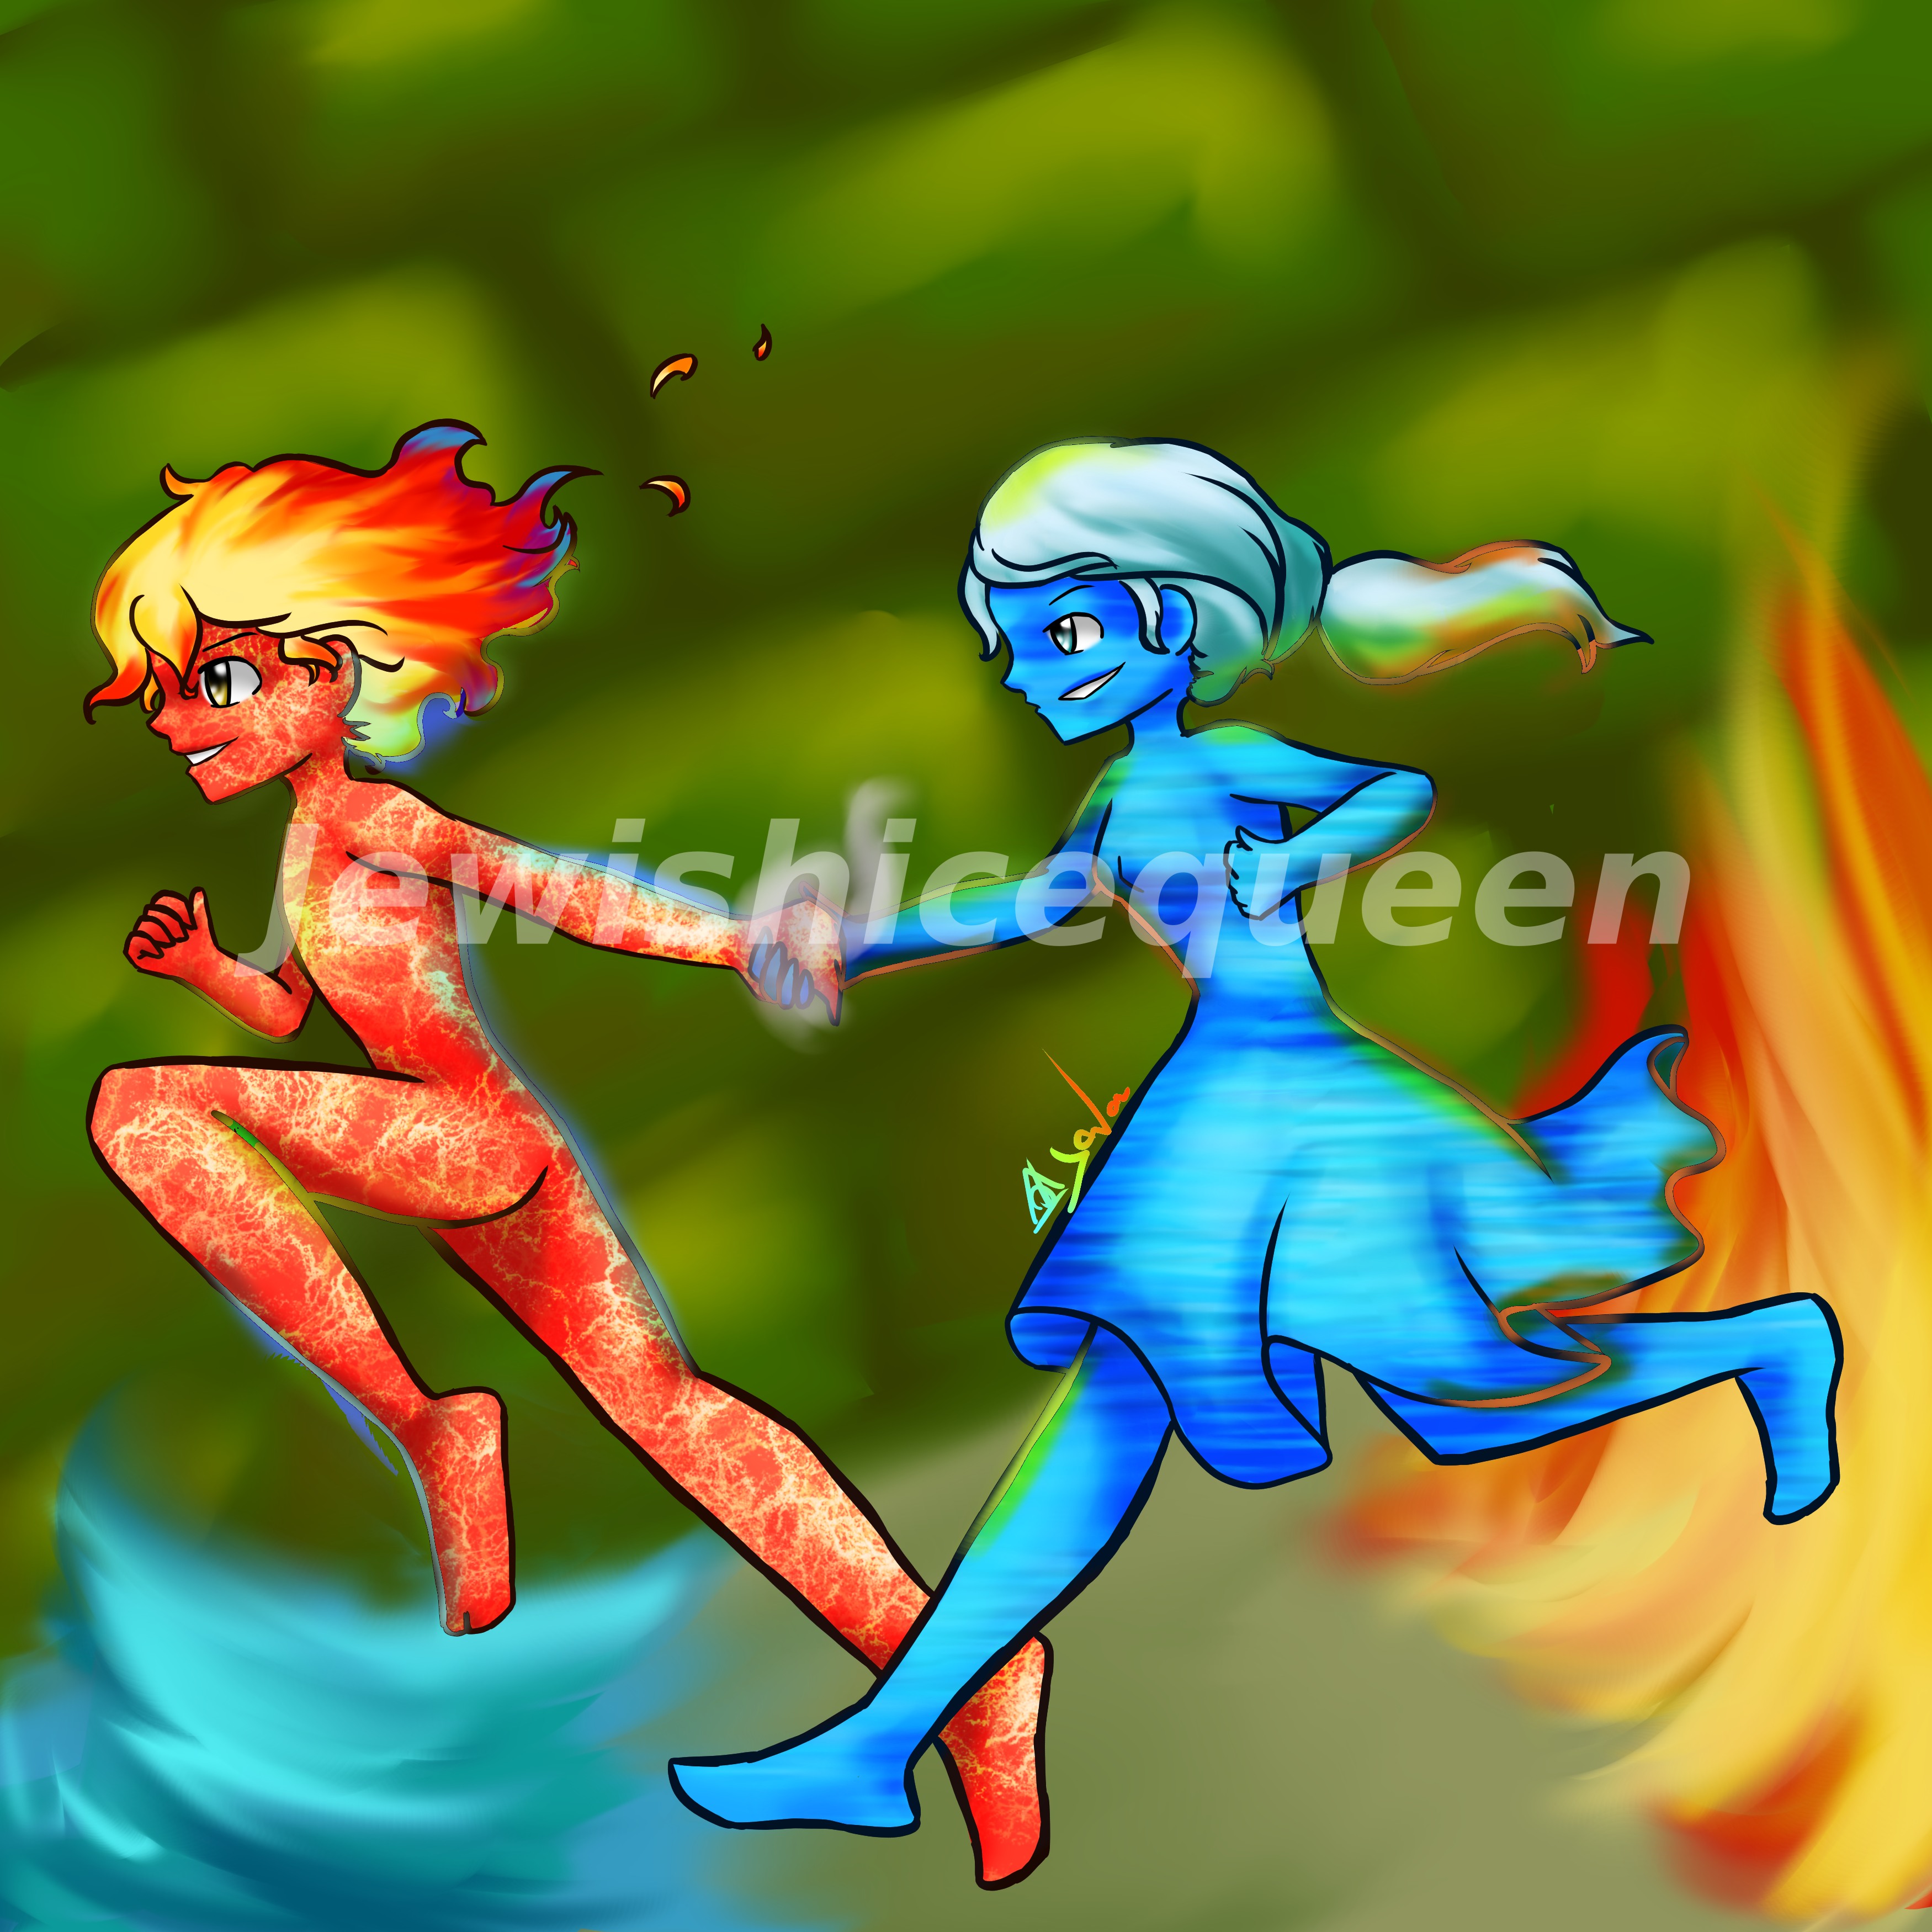 Fireboy and Watergirl by ayala7 on DeviantArt